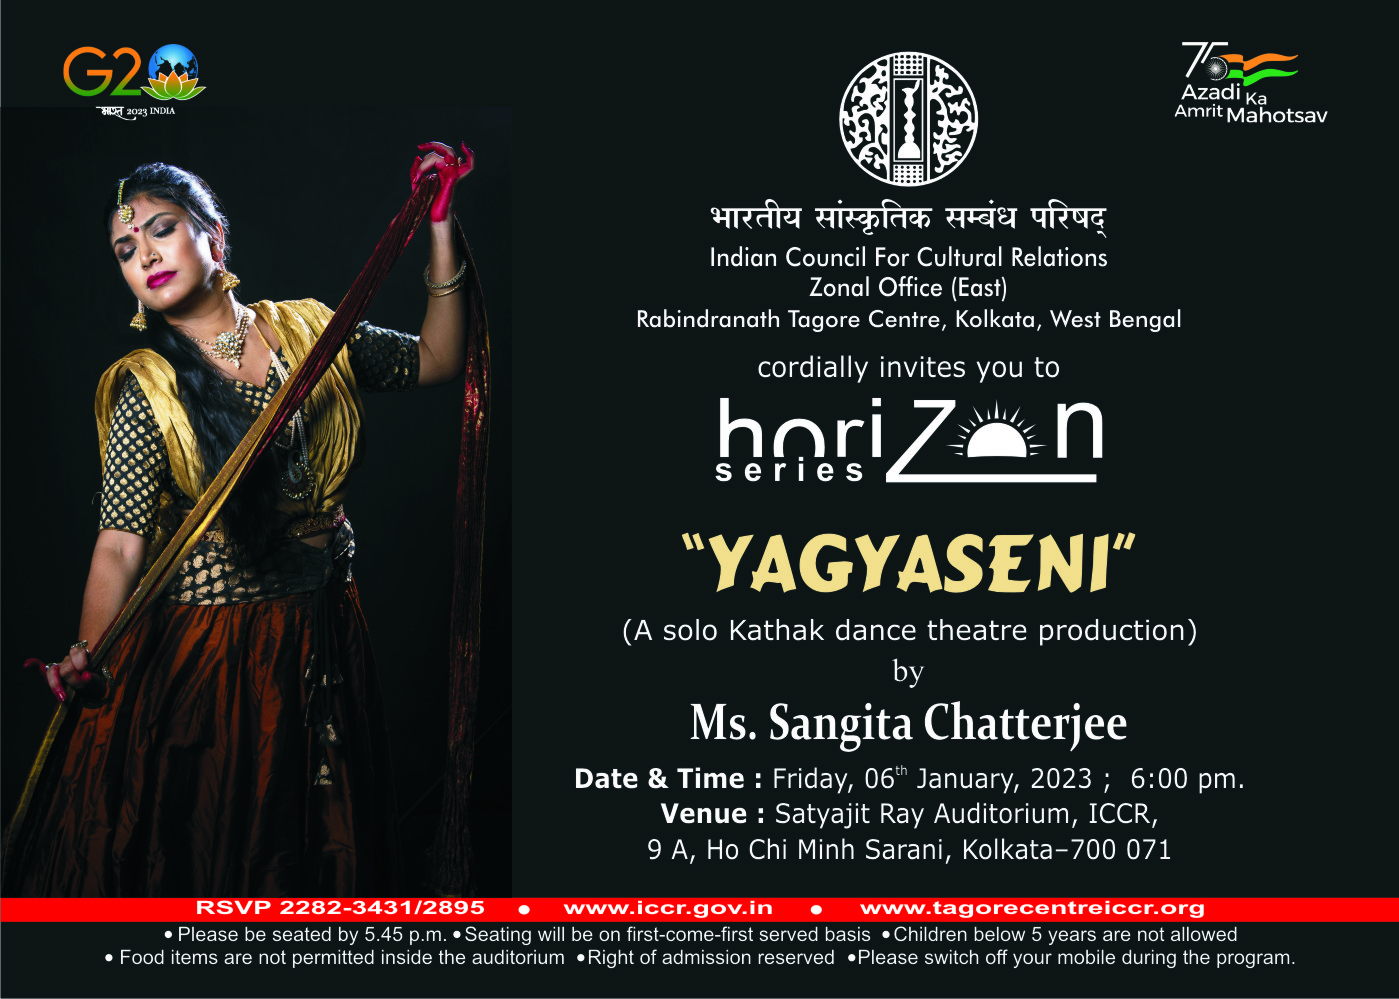 Indian Council for Cultural Relations (ICCR), Zonal Office (East) cordially invites you to Horizon Series programme YAGYASENI (Kathak dance) by Ms. Sangita Chatterjee on Friday, 06th January, 2023 at 6:00 pm. at Satyajit Ray Auditorium, Rabindranath Tagore Centre, Kolkata